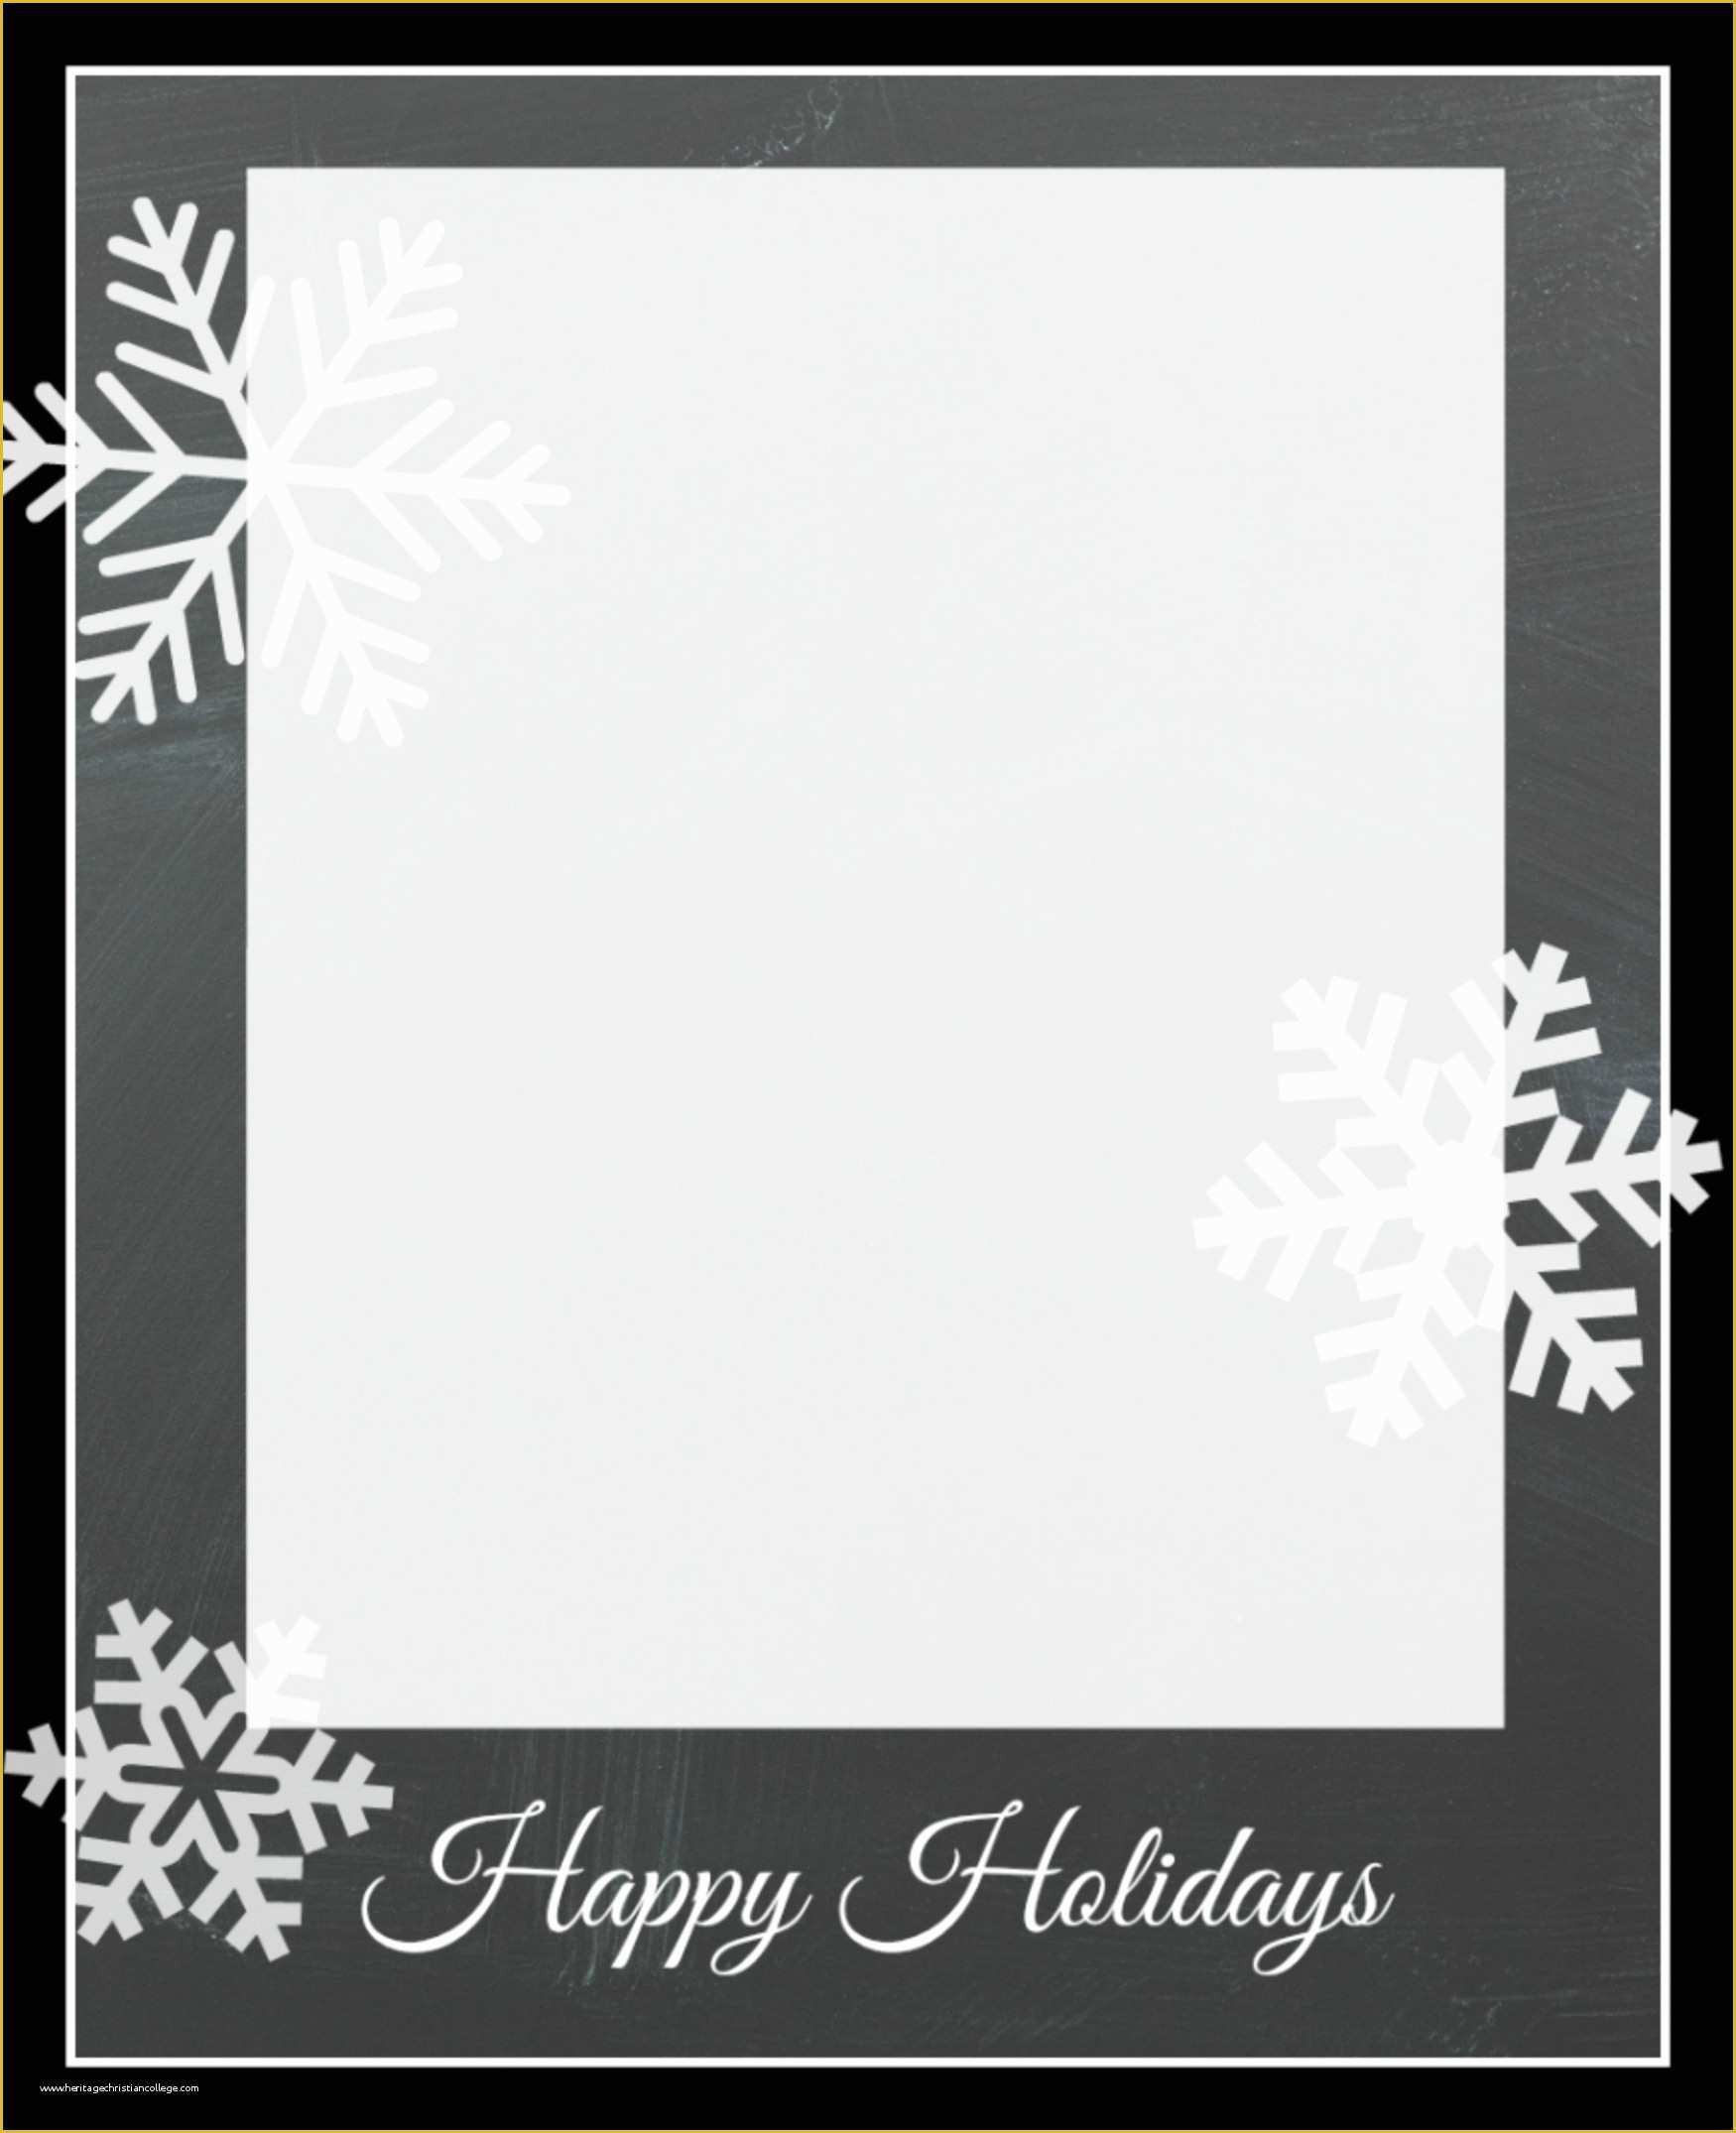 Free Christmas Card Templates for Word Of Free Christmas Card Templates Crazy Little Projects